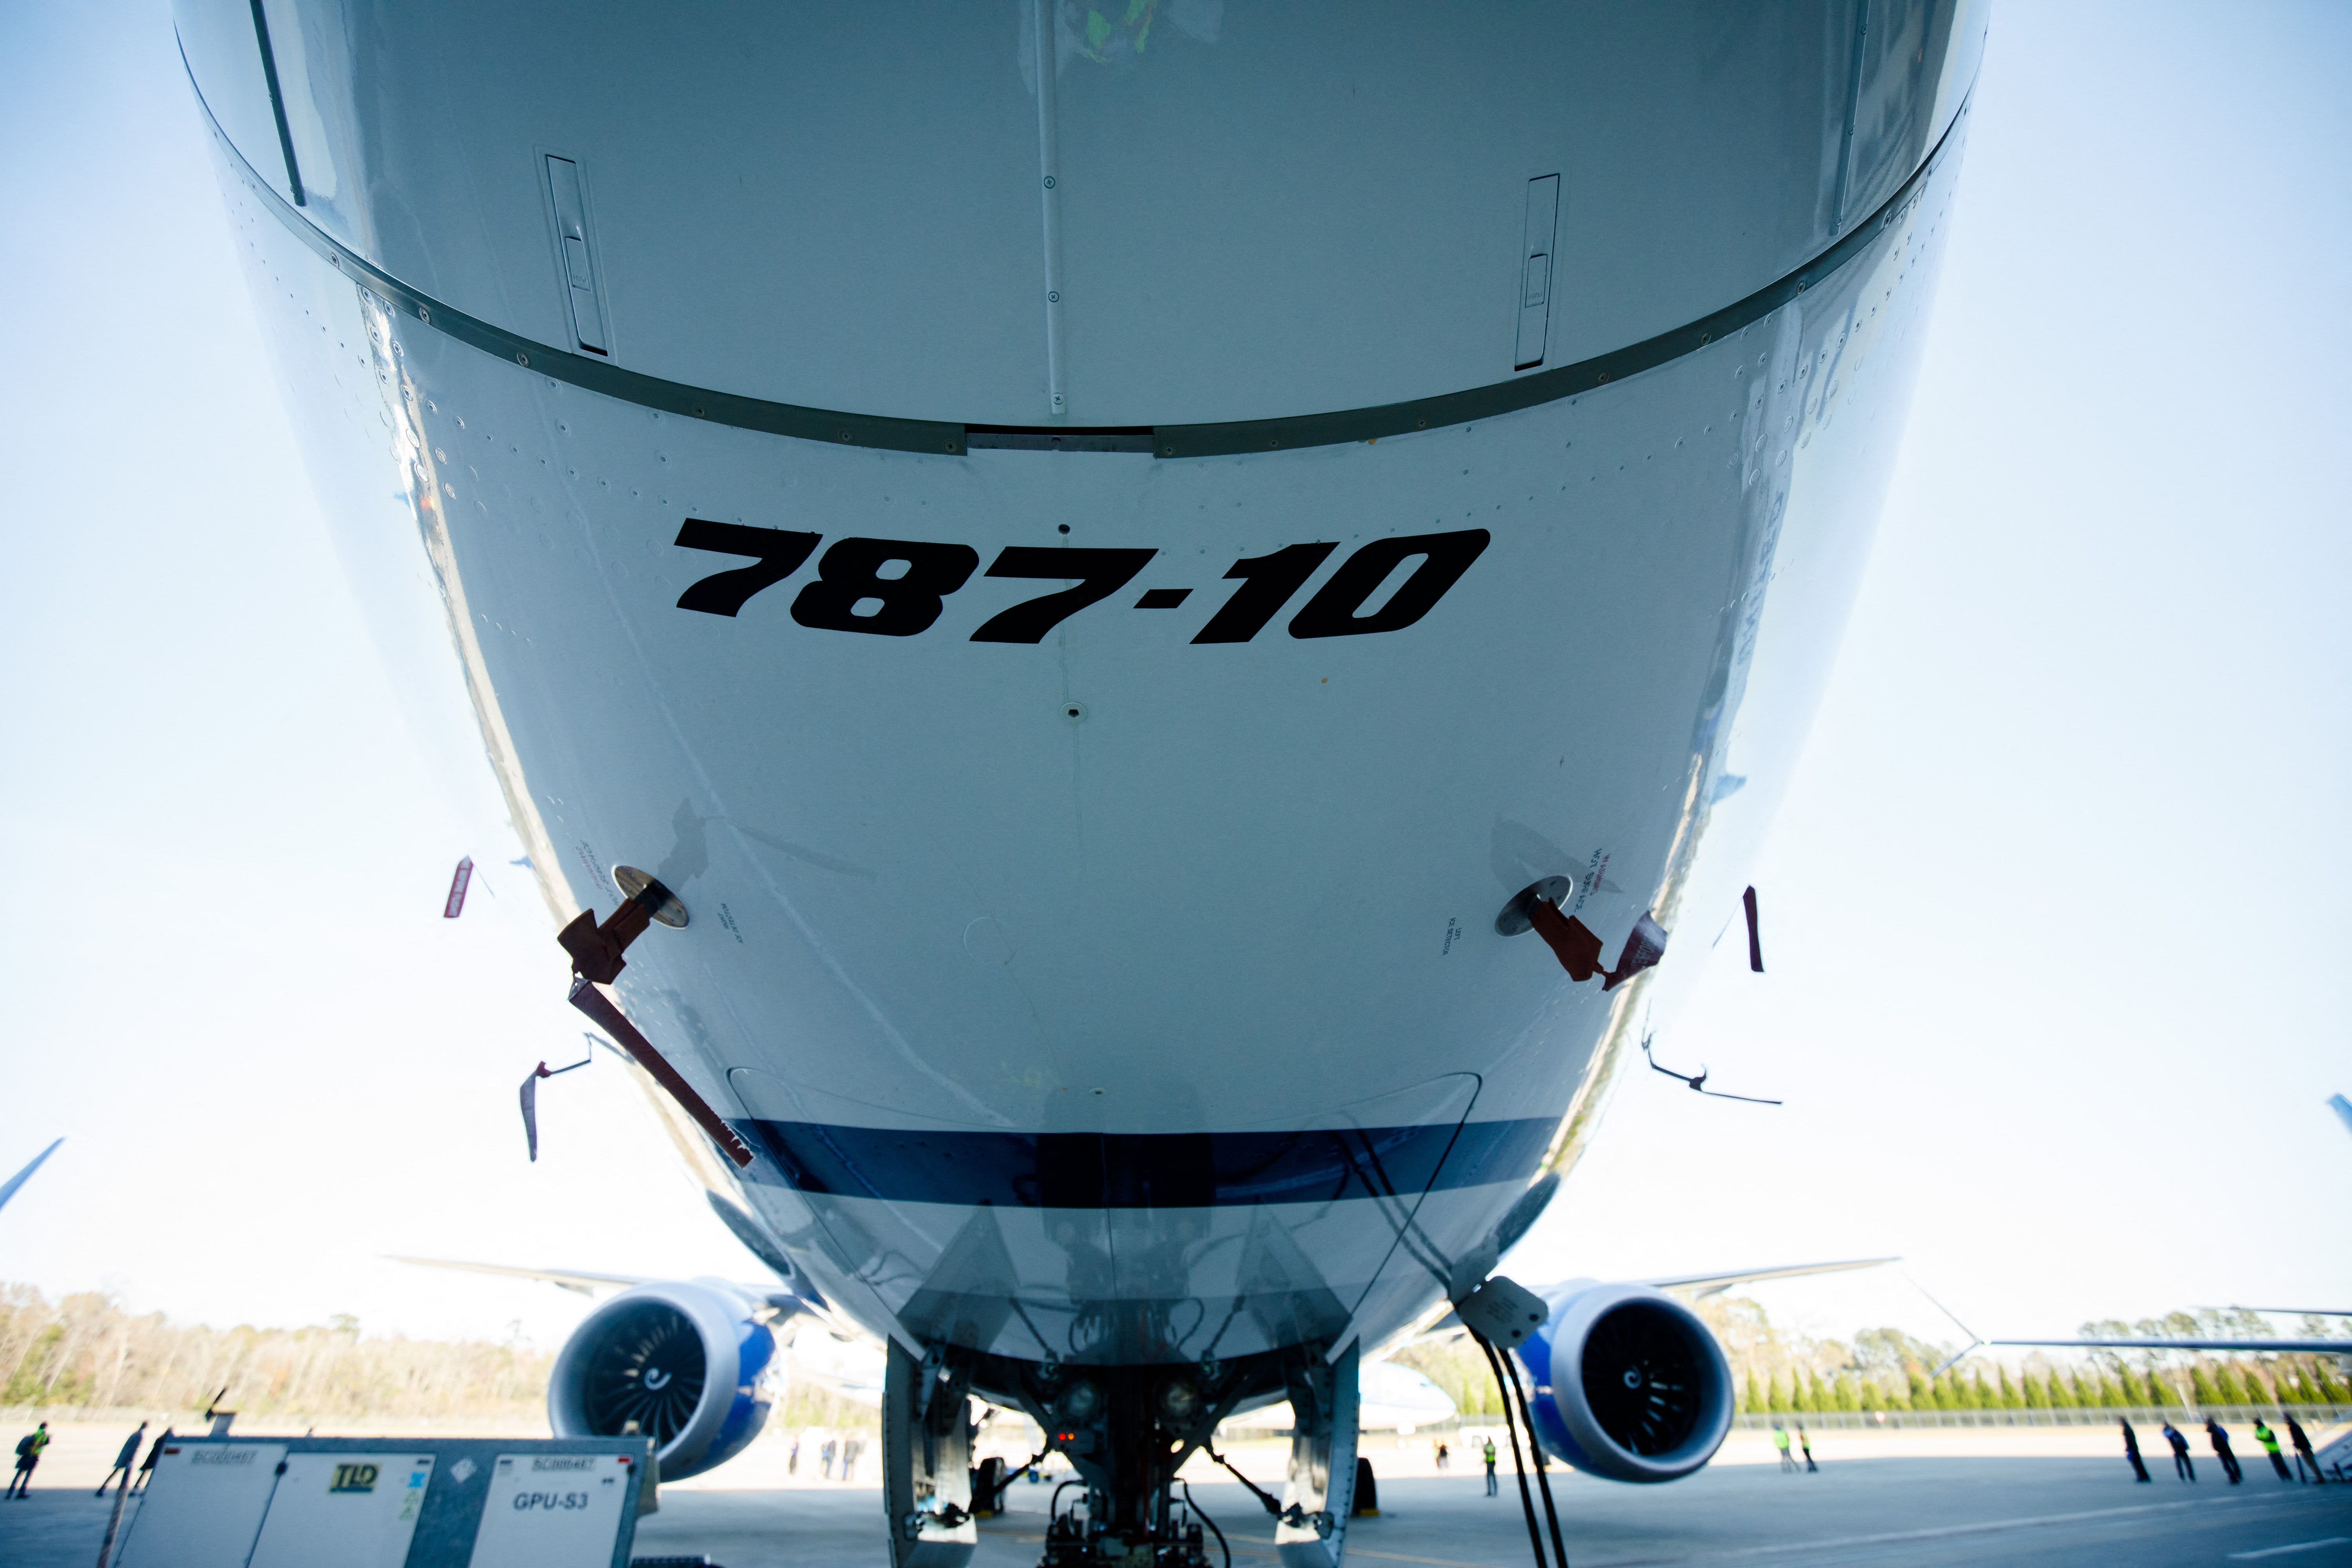 Boeing has temporarily halted deliveries of the 787 Dreamliner